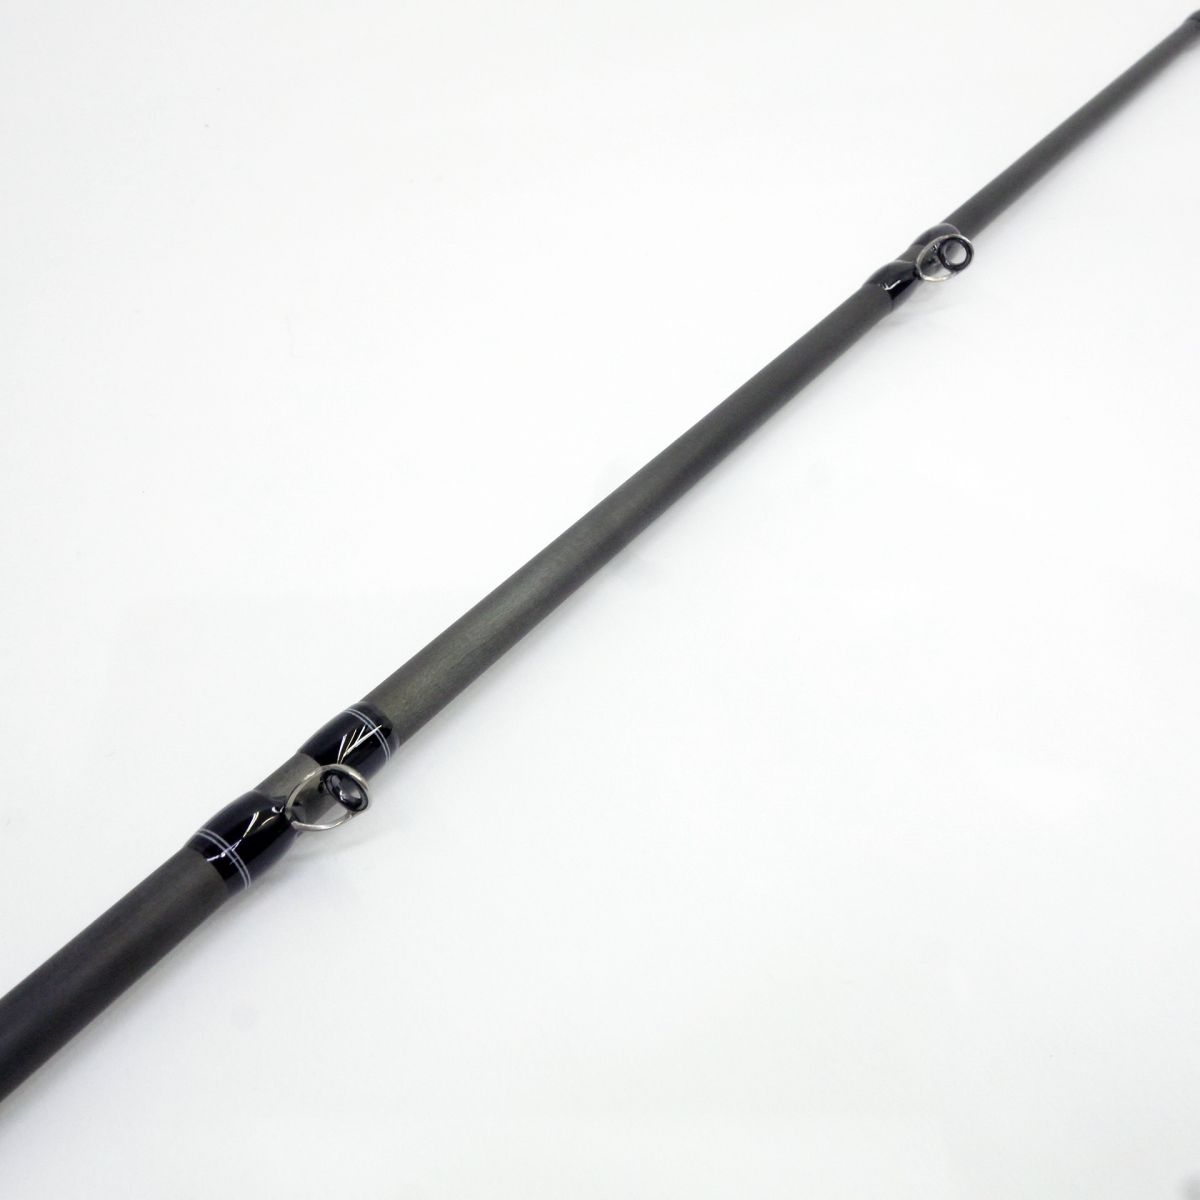  Studio Composite four The Be -stroke FTB 610XH 6 feet 10 -inch carbon grip specification * used 